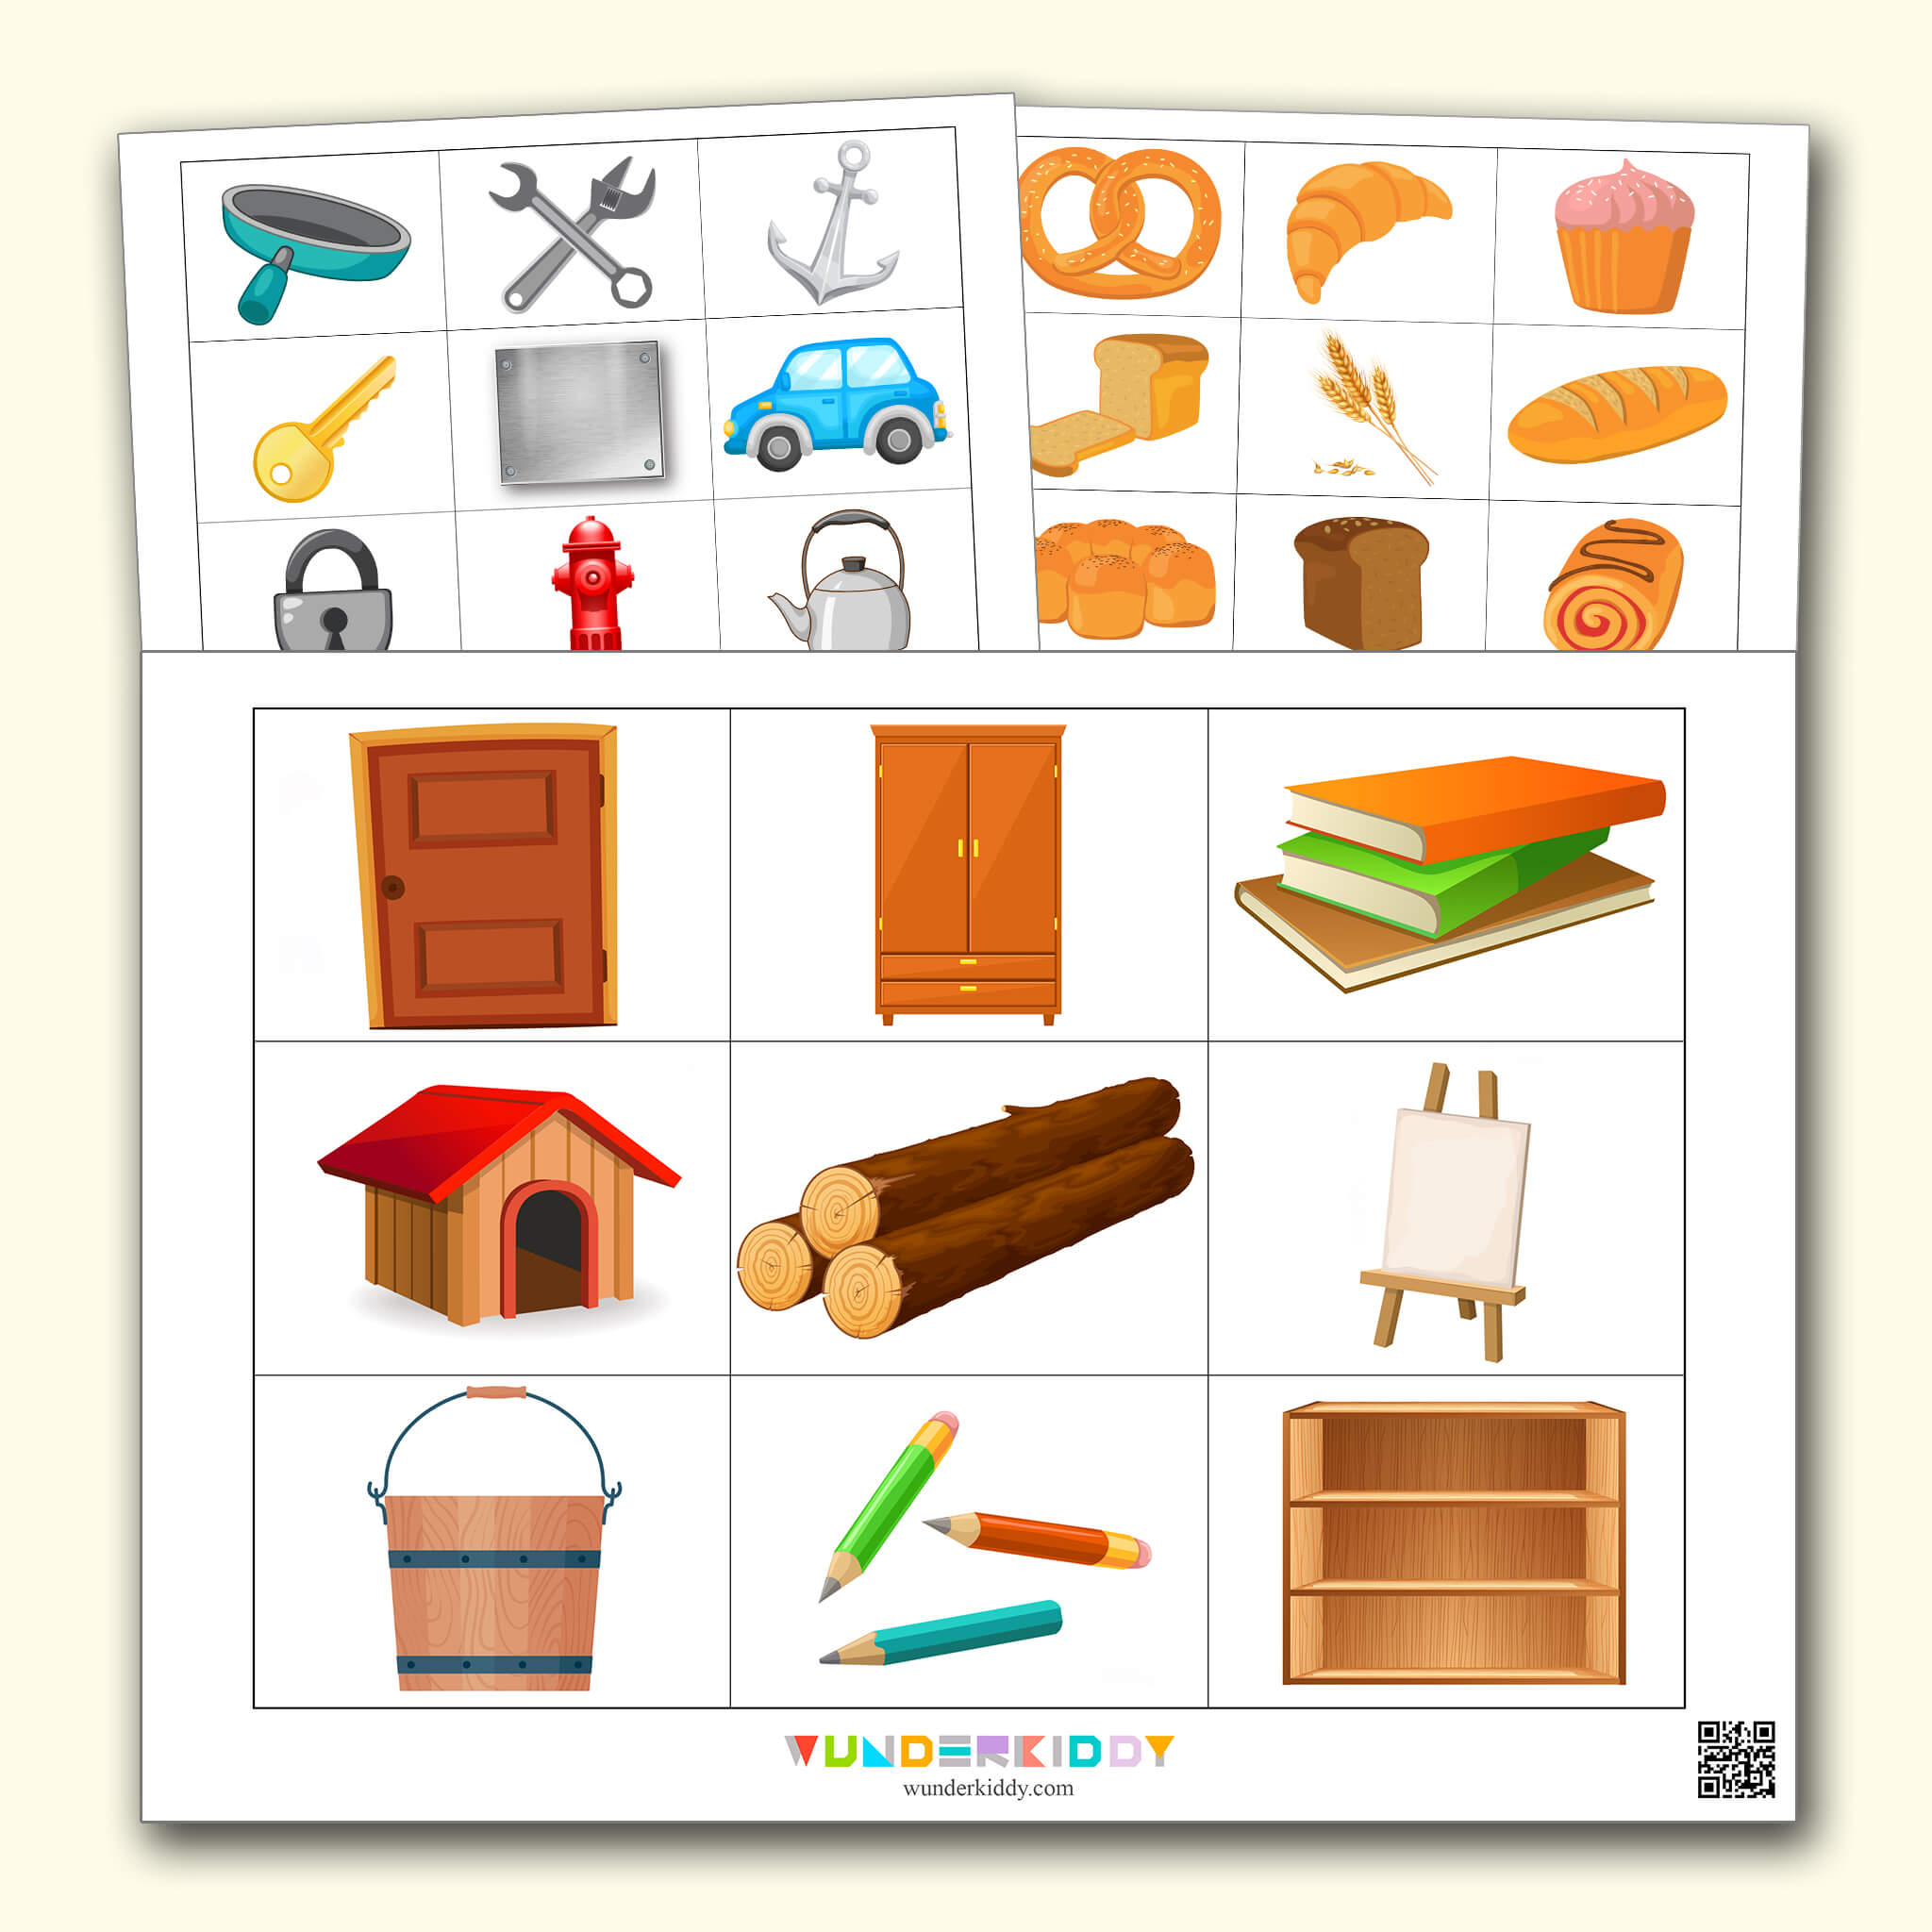 Kindergarten Sorting Activity Materials and Objects